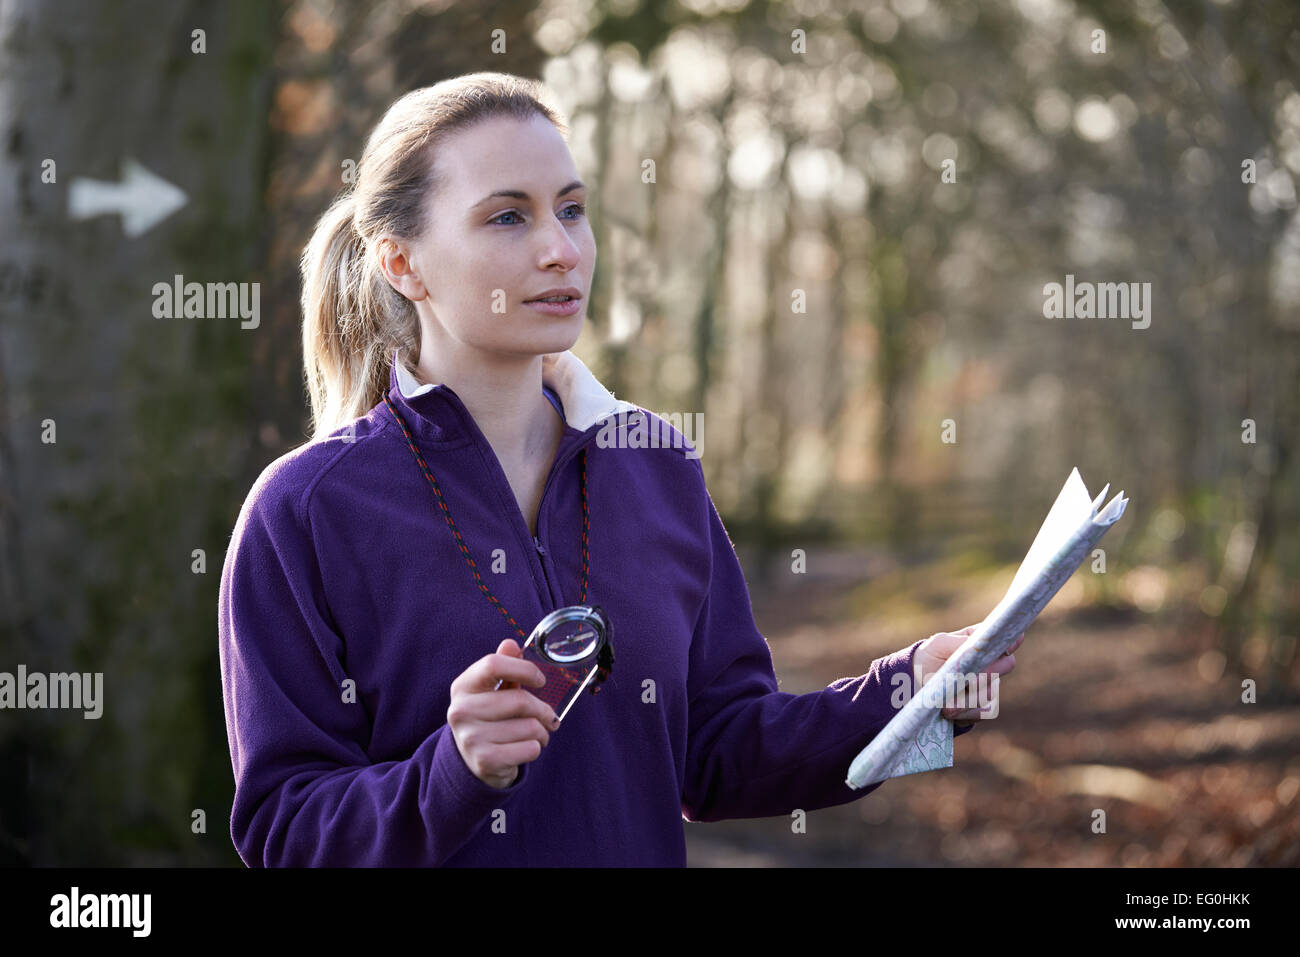 Woman Orienteering In Woodlands With Map And Compass Stock Photo